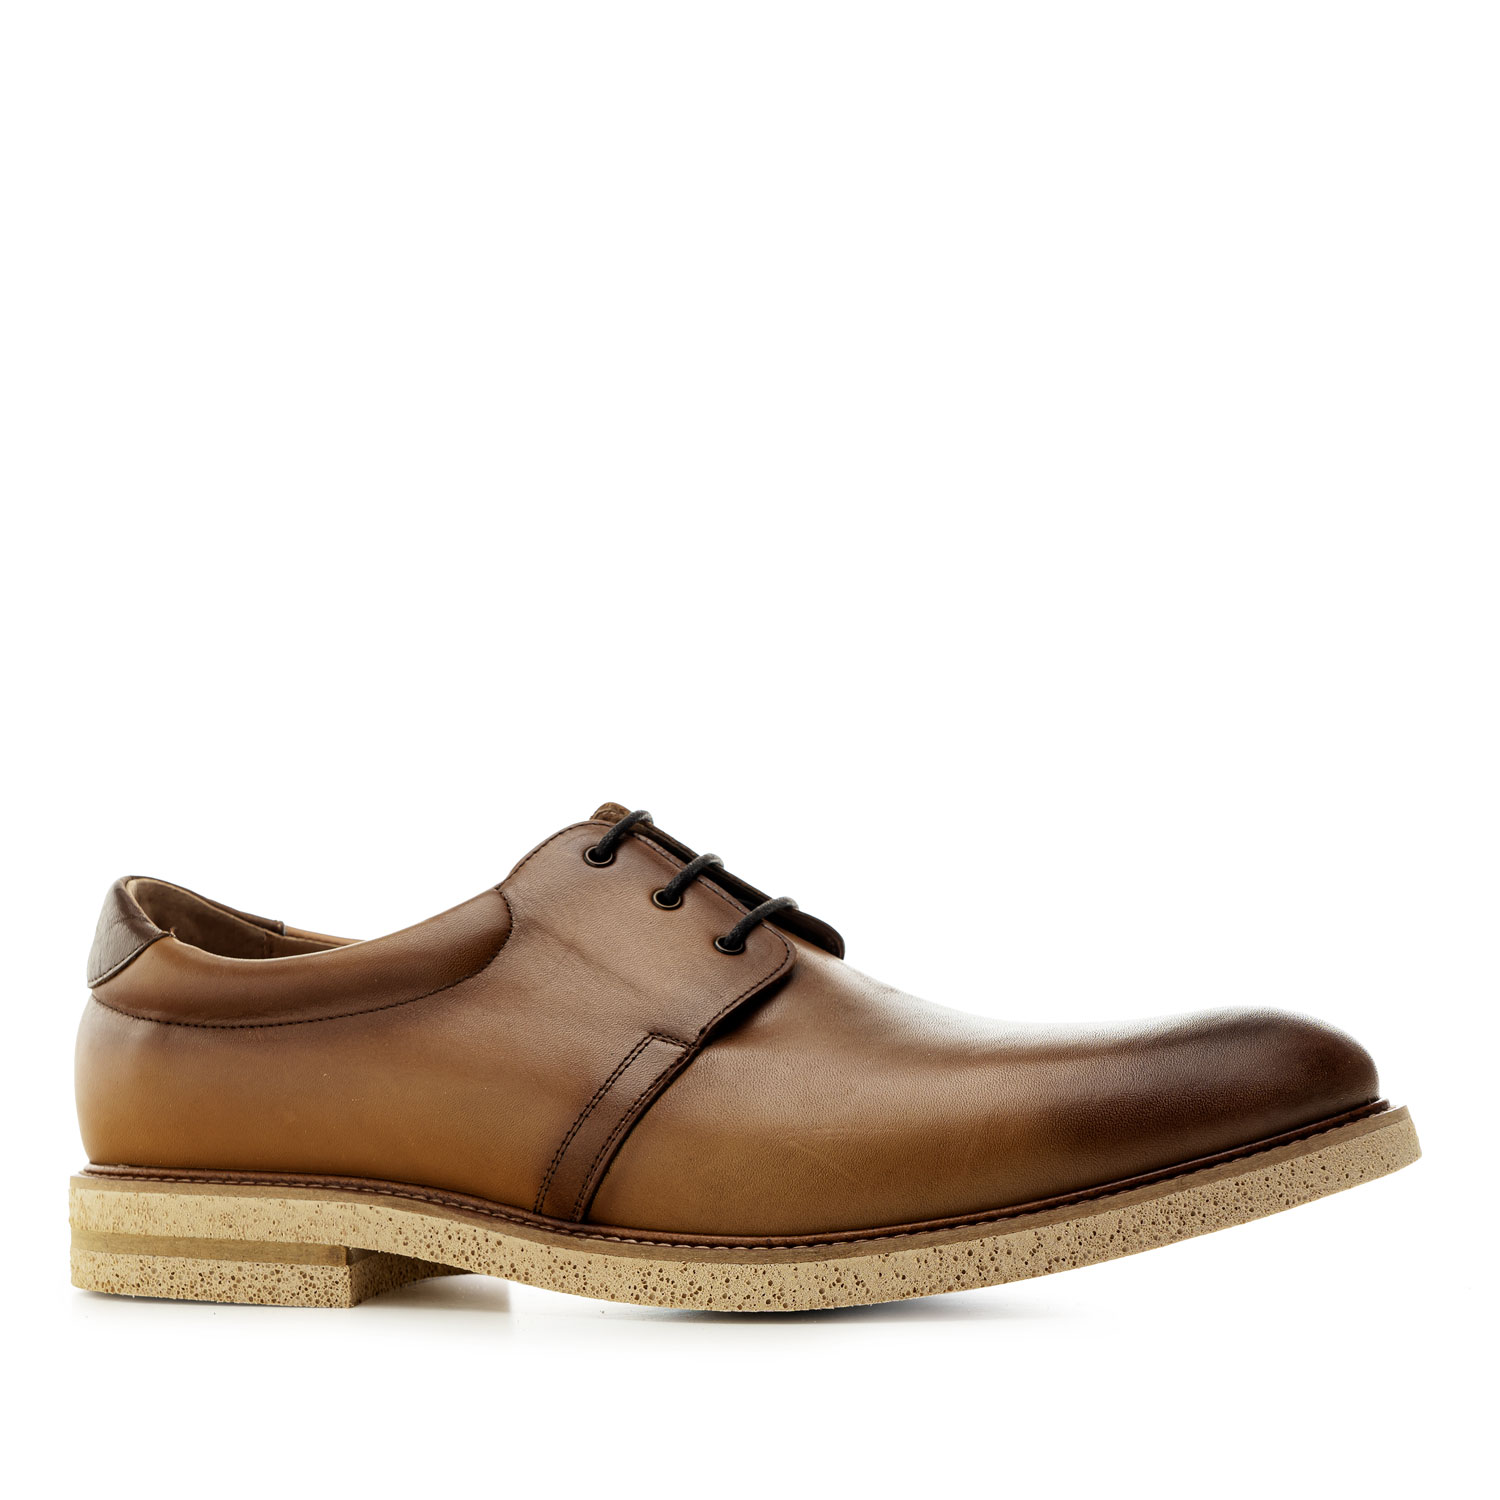 Men's Dress Shoes in Tan Leather 